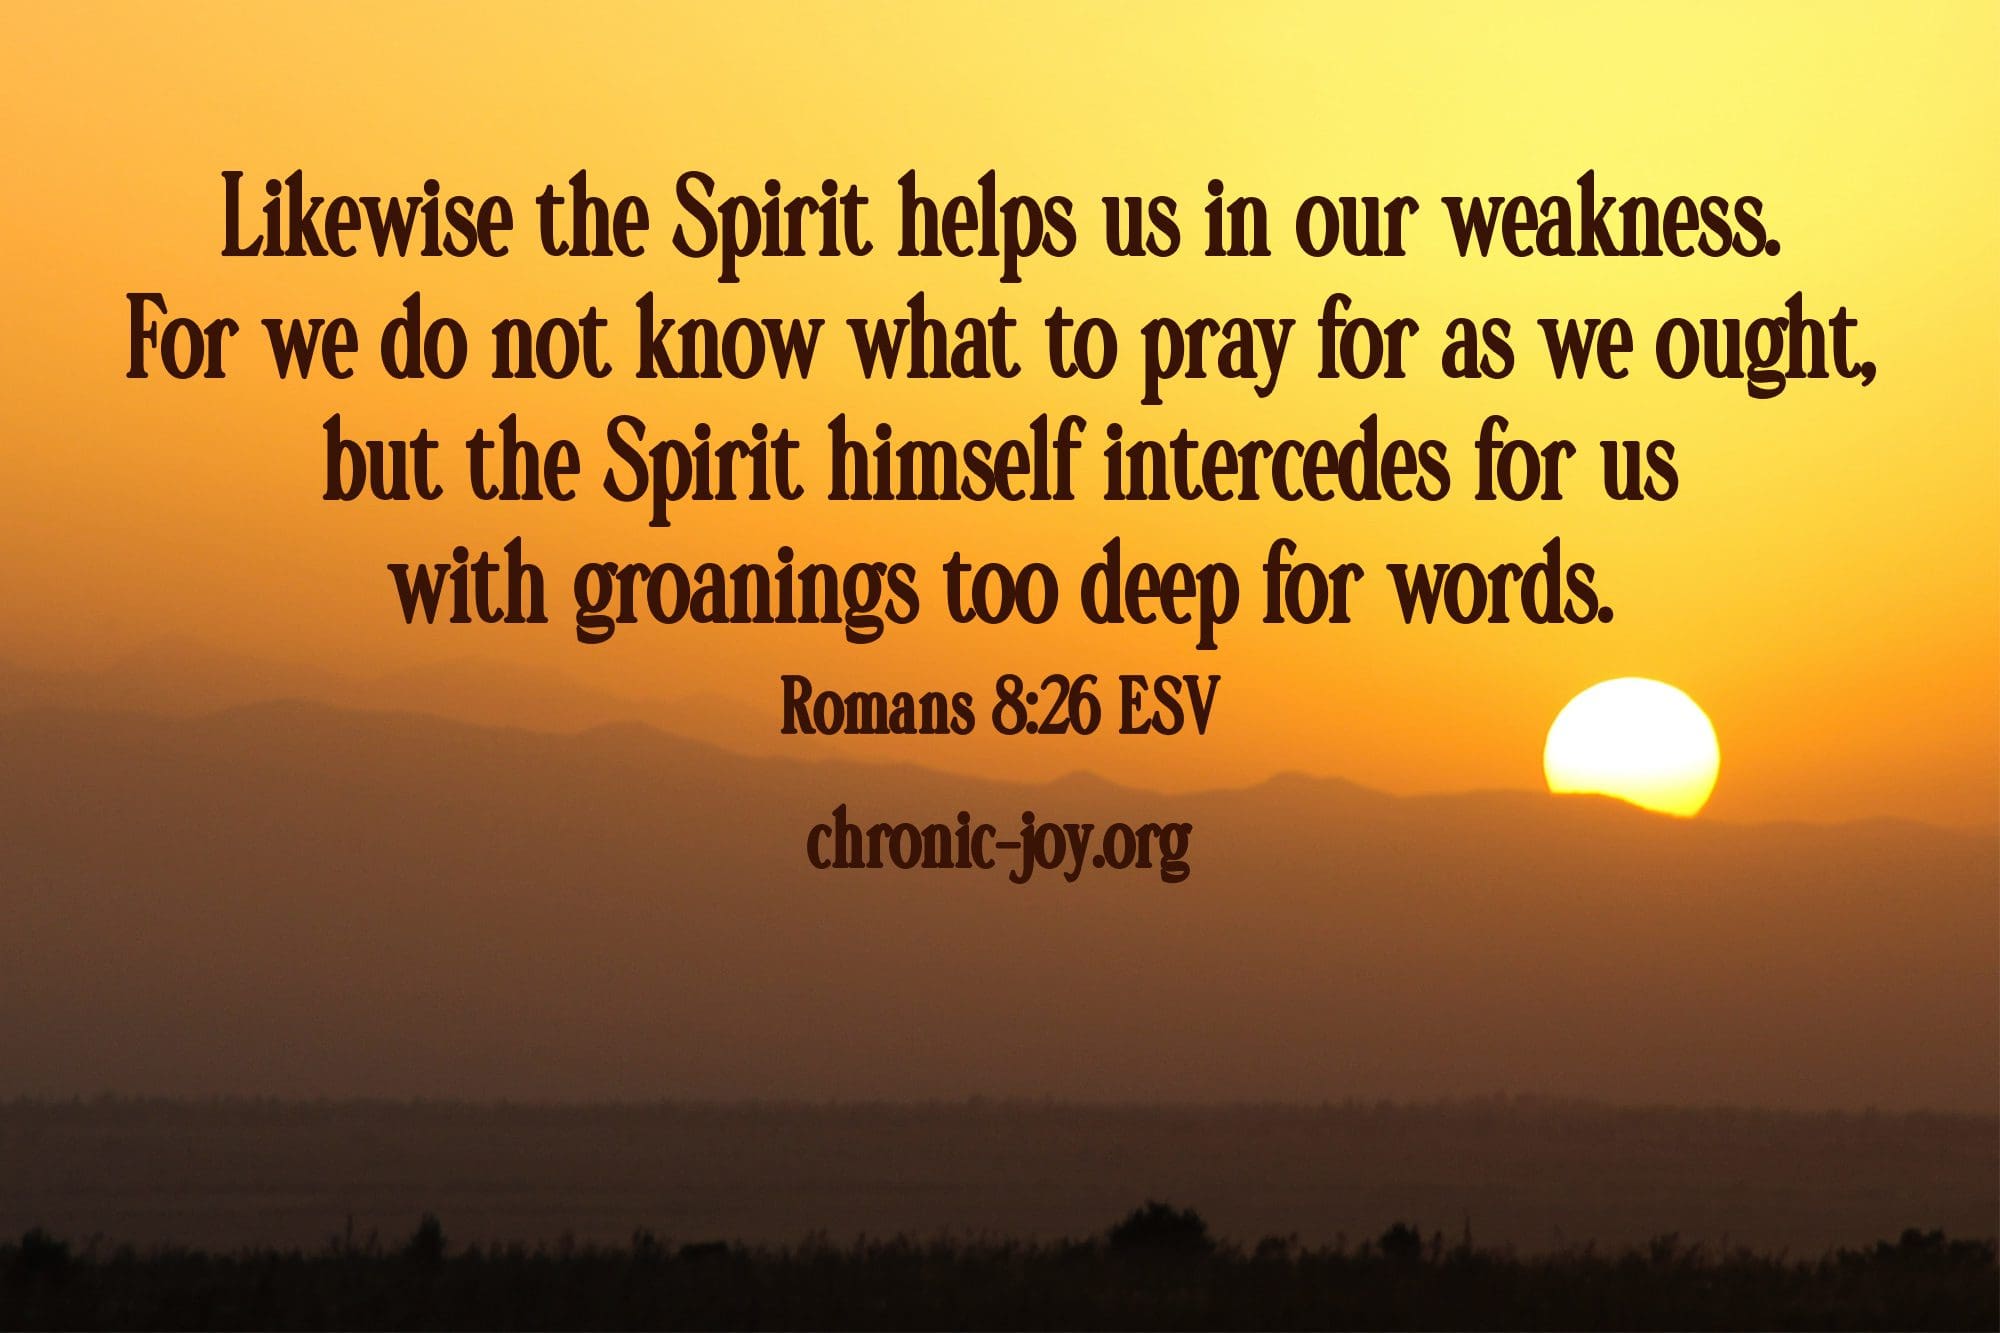 "Likewise the Spirit helps us in our weakness. For we do not know what to pray for as we ought, but the Spirit himself intercedes for us with groanings too deep for words." Romans 8:26 ESV